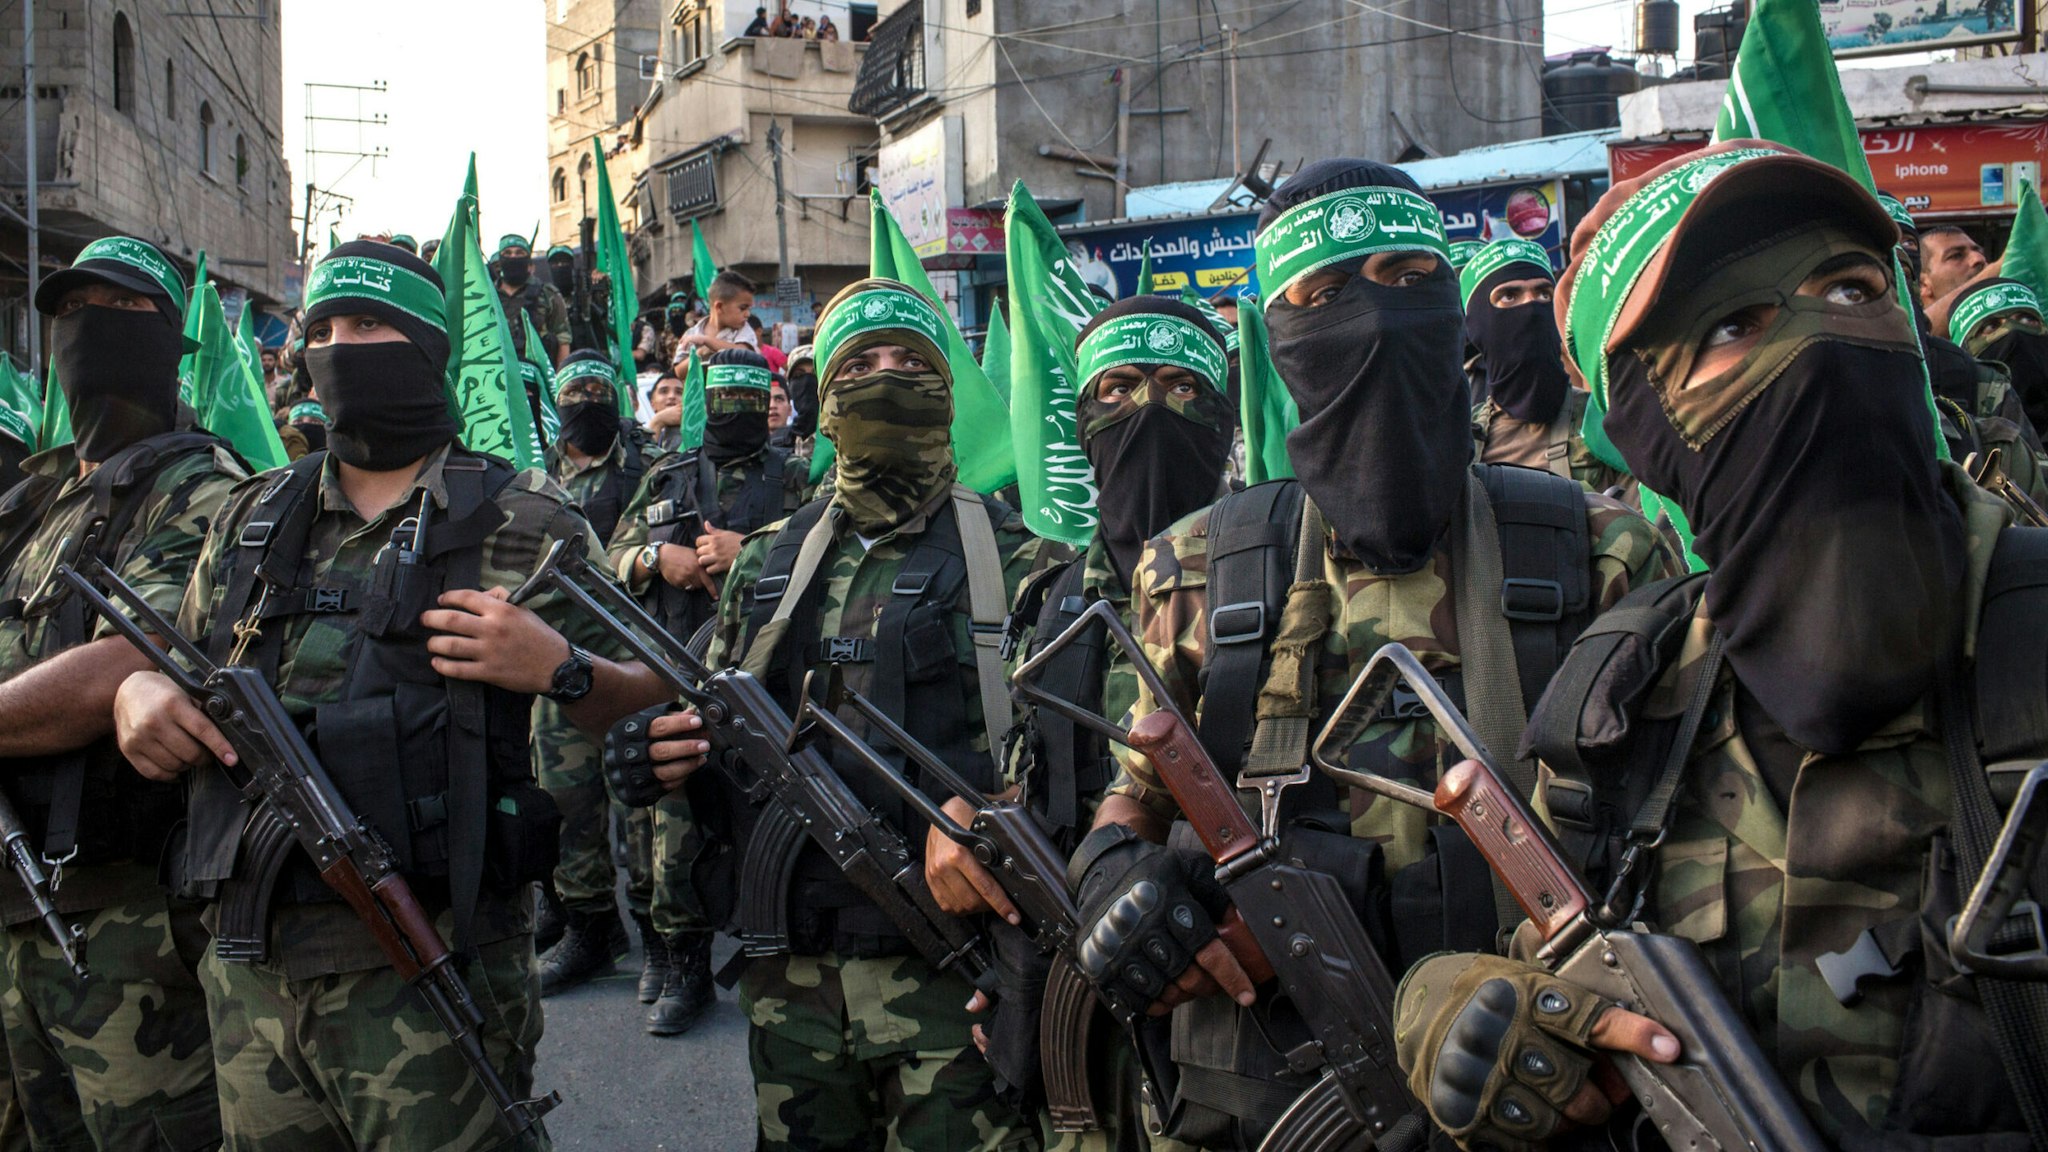 GAZA CITY, GAZA - JULY 20: Palestinian Hamas militants are seen during a military show in the Bani Suheila district on July 20, 2017 in Gaza City, Gaza. For the past ten years Gaza residents have lived with constant power shortages, in recent years these cuts have worsened, with supply of regular power limited to four hours a day. On June 11, 2017 Israel announced a new round of cuts at the request of the Palestinian authorities and the decision was seen as an attempt by President Mahmoud Abbas to pressure Gaza's Hamas leadership. Prior to the new cuts Gaza received 150 megawatts per day, far below it's requirements of 450 megawatts. In April, Gaza's sole power station which supplied 60 megawatts shut down, after running out of fuel, the three lines from Egypt, which provided 27 megawatts are rarely operational, leaving Gaza reliant on the 125 megawatts supplied by Israel's power plant. The new cuts now restrict electricity to three hours a day severely effecting hospital patients with chronic conditions and babies on life support. During blackout hours residents use private generators, solar panels and battery operated light sources to live. June 2017 also marked ten years since Israel began a land, sea and air blockade over Gaza. Under the blockade, movement of people and goods is restricted and exports and imports of raw materials have been banned. The restrictions have virtually cut off access for Gaza's two million residents to the outside world and unemployment rates have skyrocketed forcing many people into poverty and leaving approximately 80% of the population dependent on humanitarian aid.